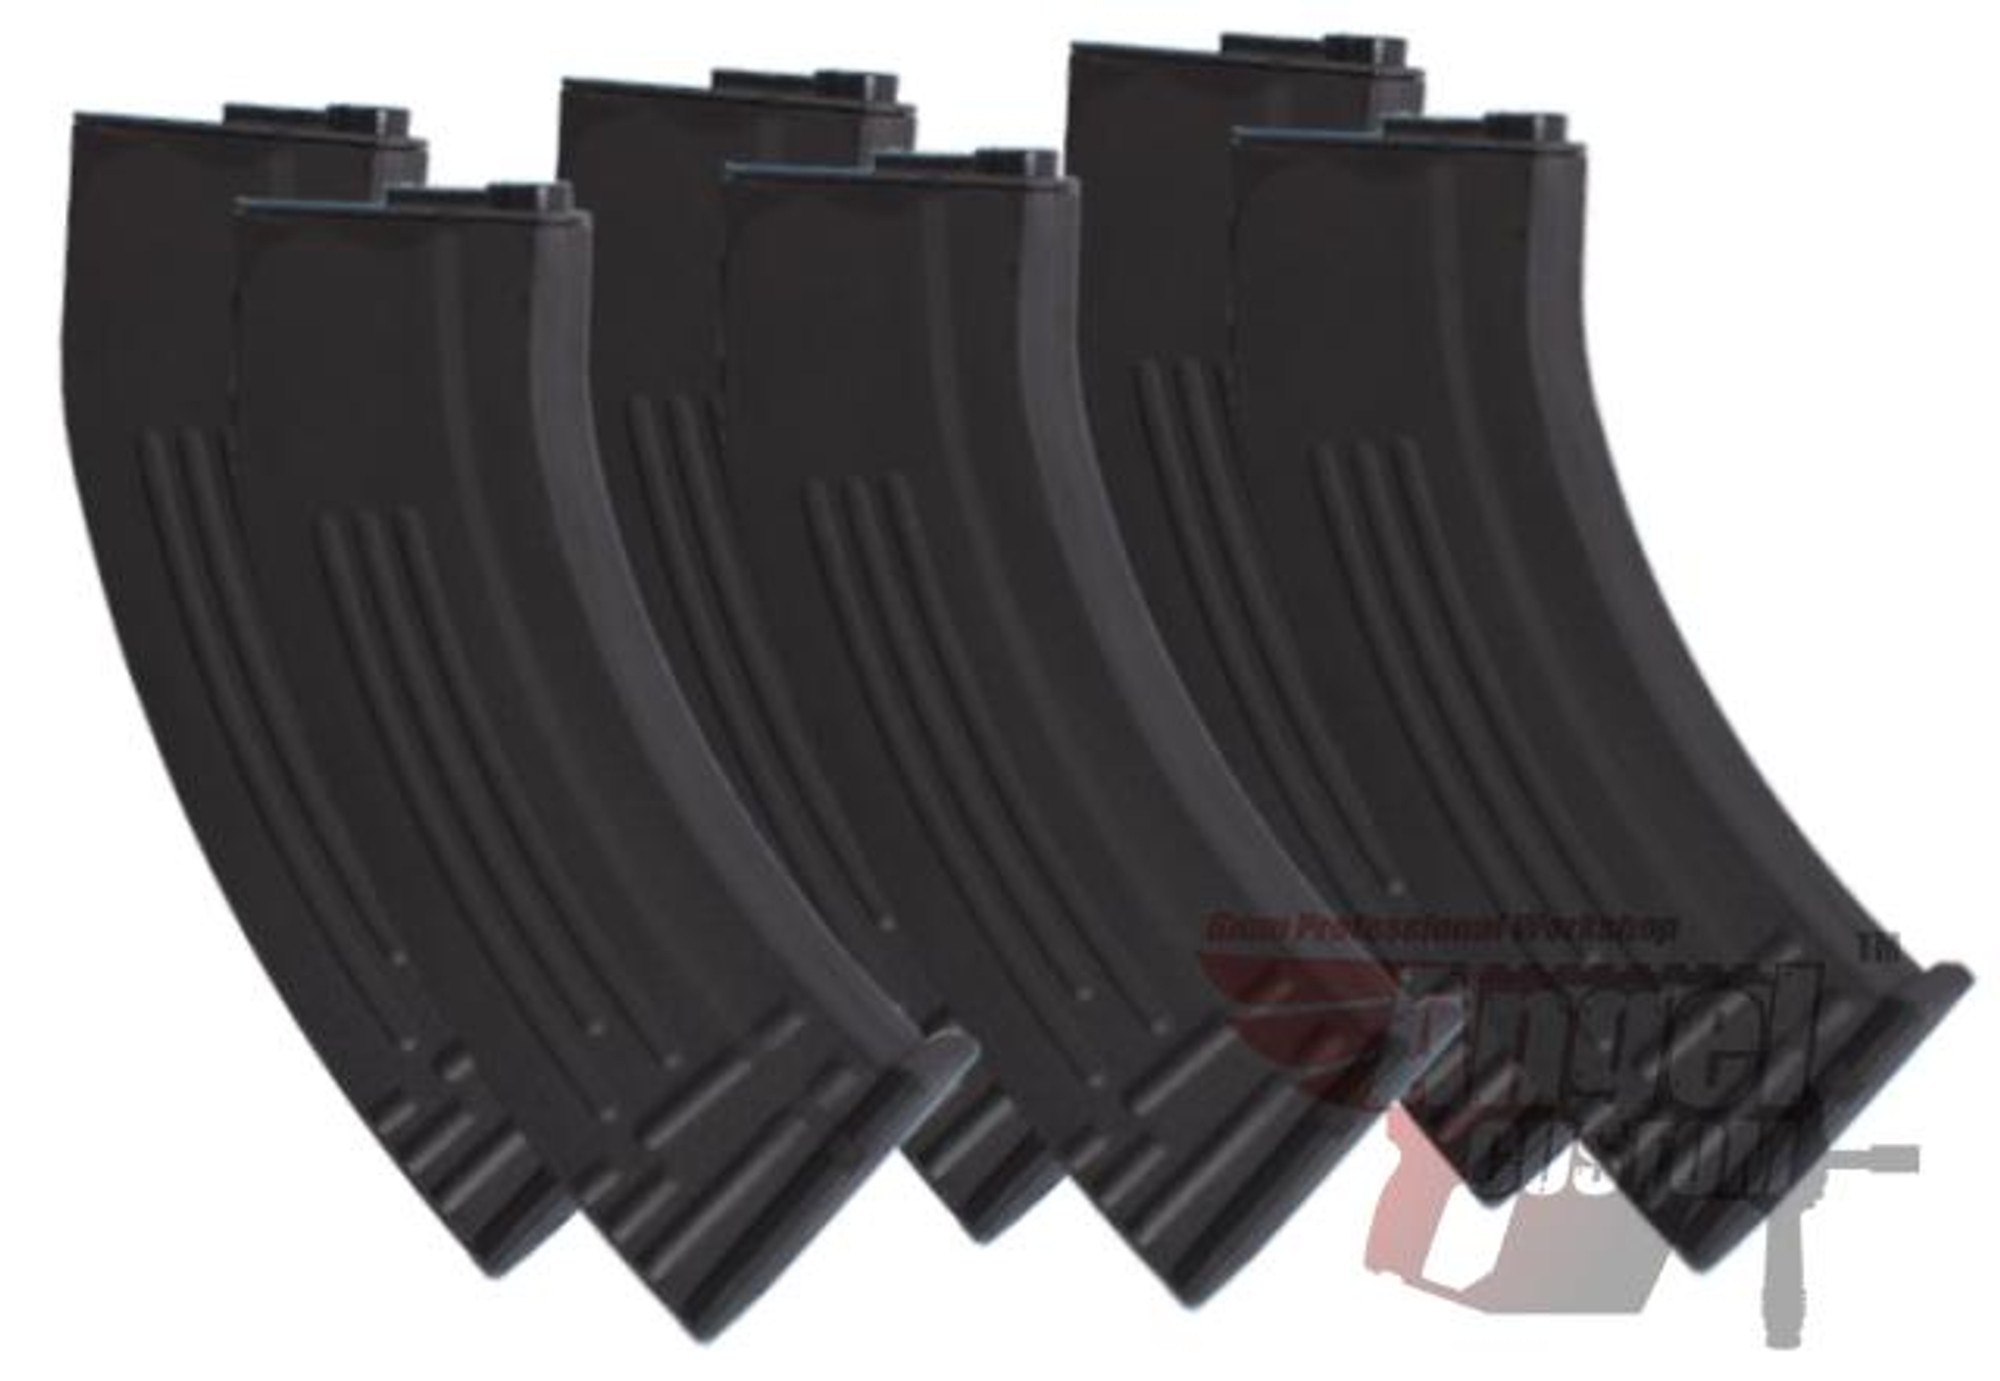 Angel Custom SR-47 Type 170rd Mid-Cap Magazine for M4 M16 Series Airsoft AEG (Package: Set of 6)